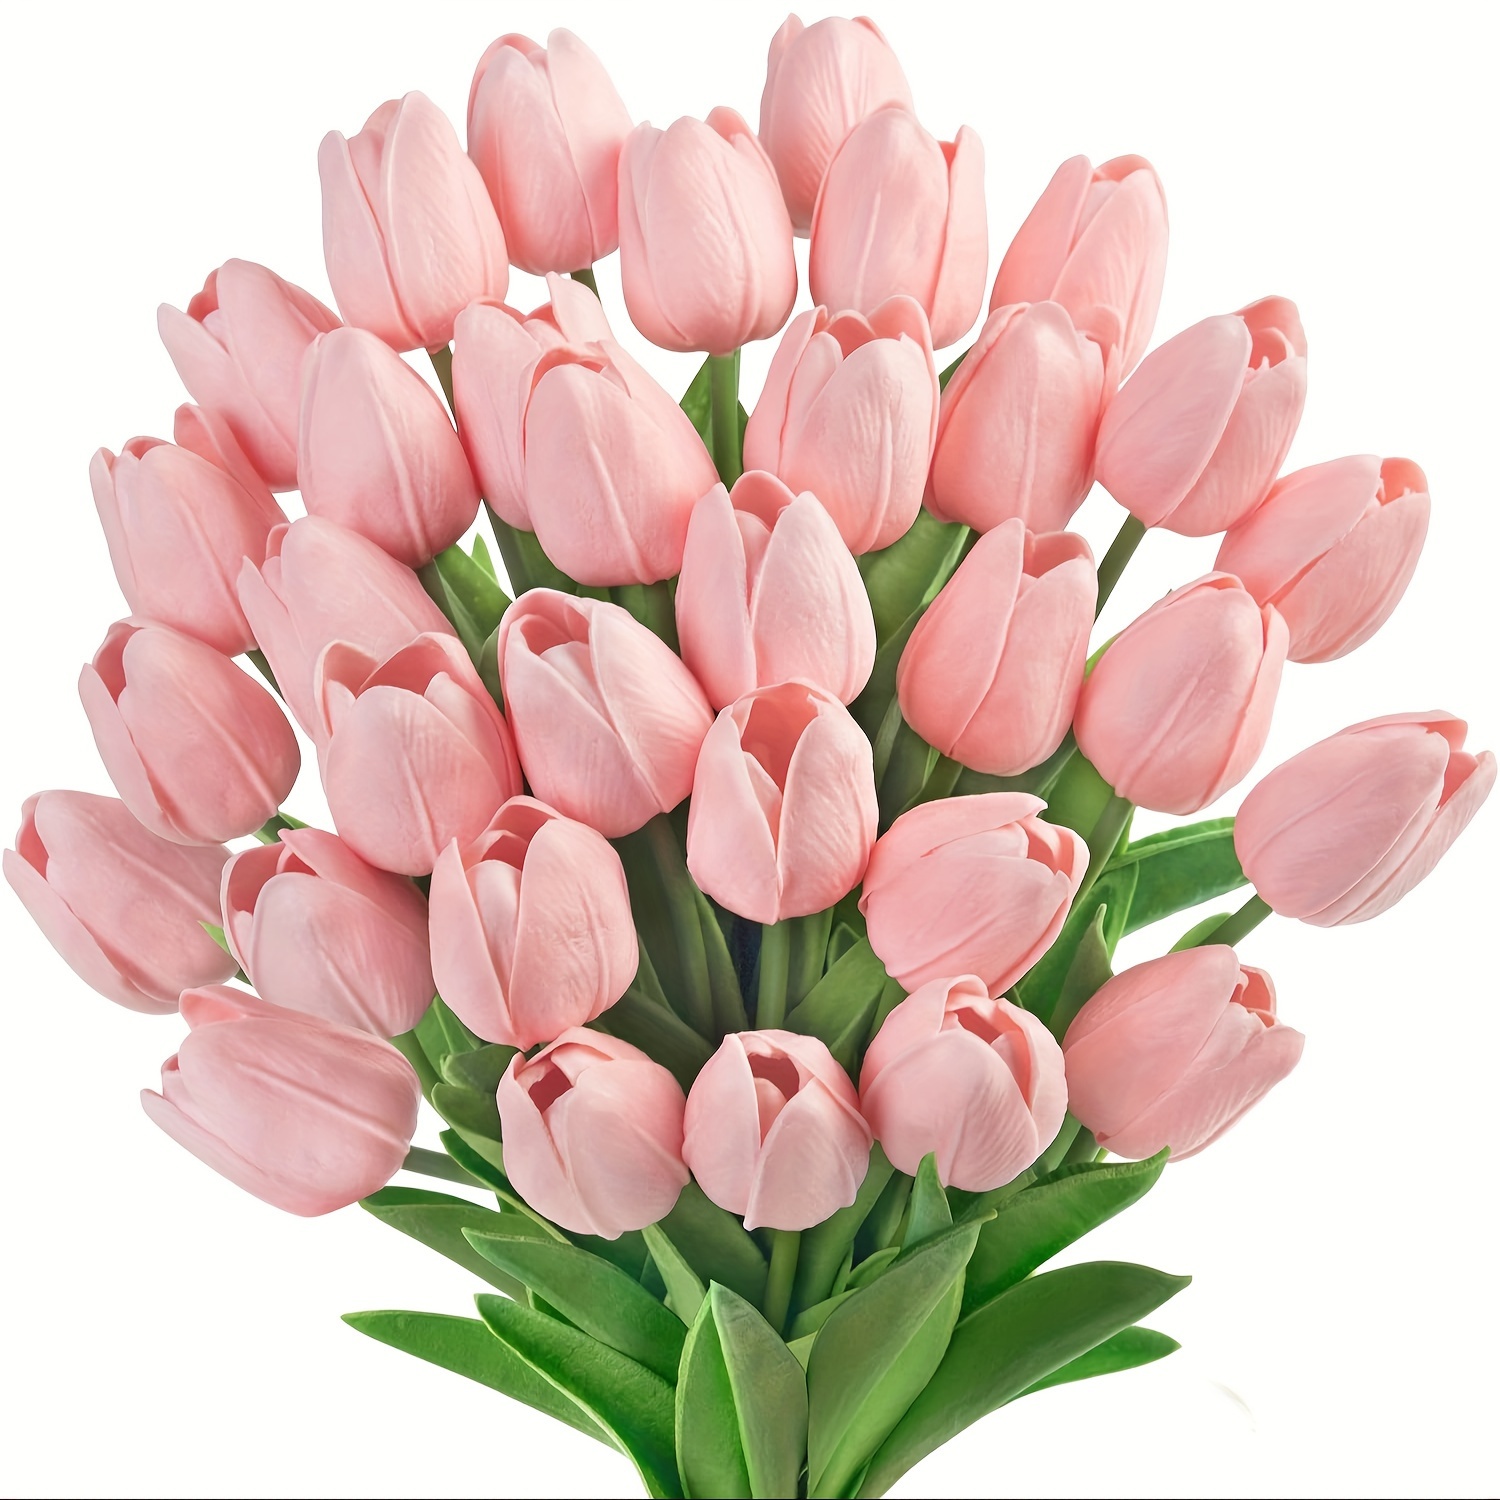 

10pcs Artificial Tulips Flowers Fake Tulips, Real Touch Faux Flowers Bouquet For Room Table Office Party Wedding Home Decorations, Pink